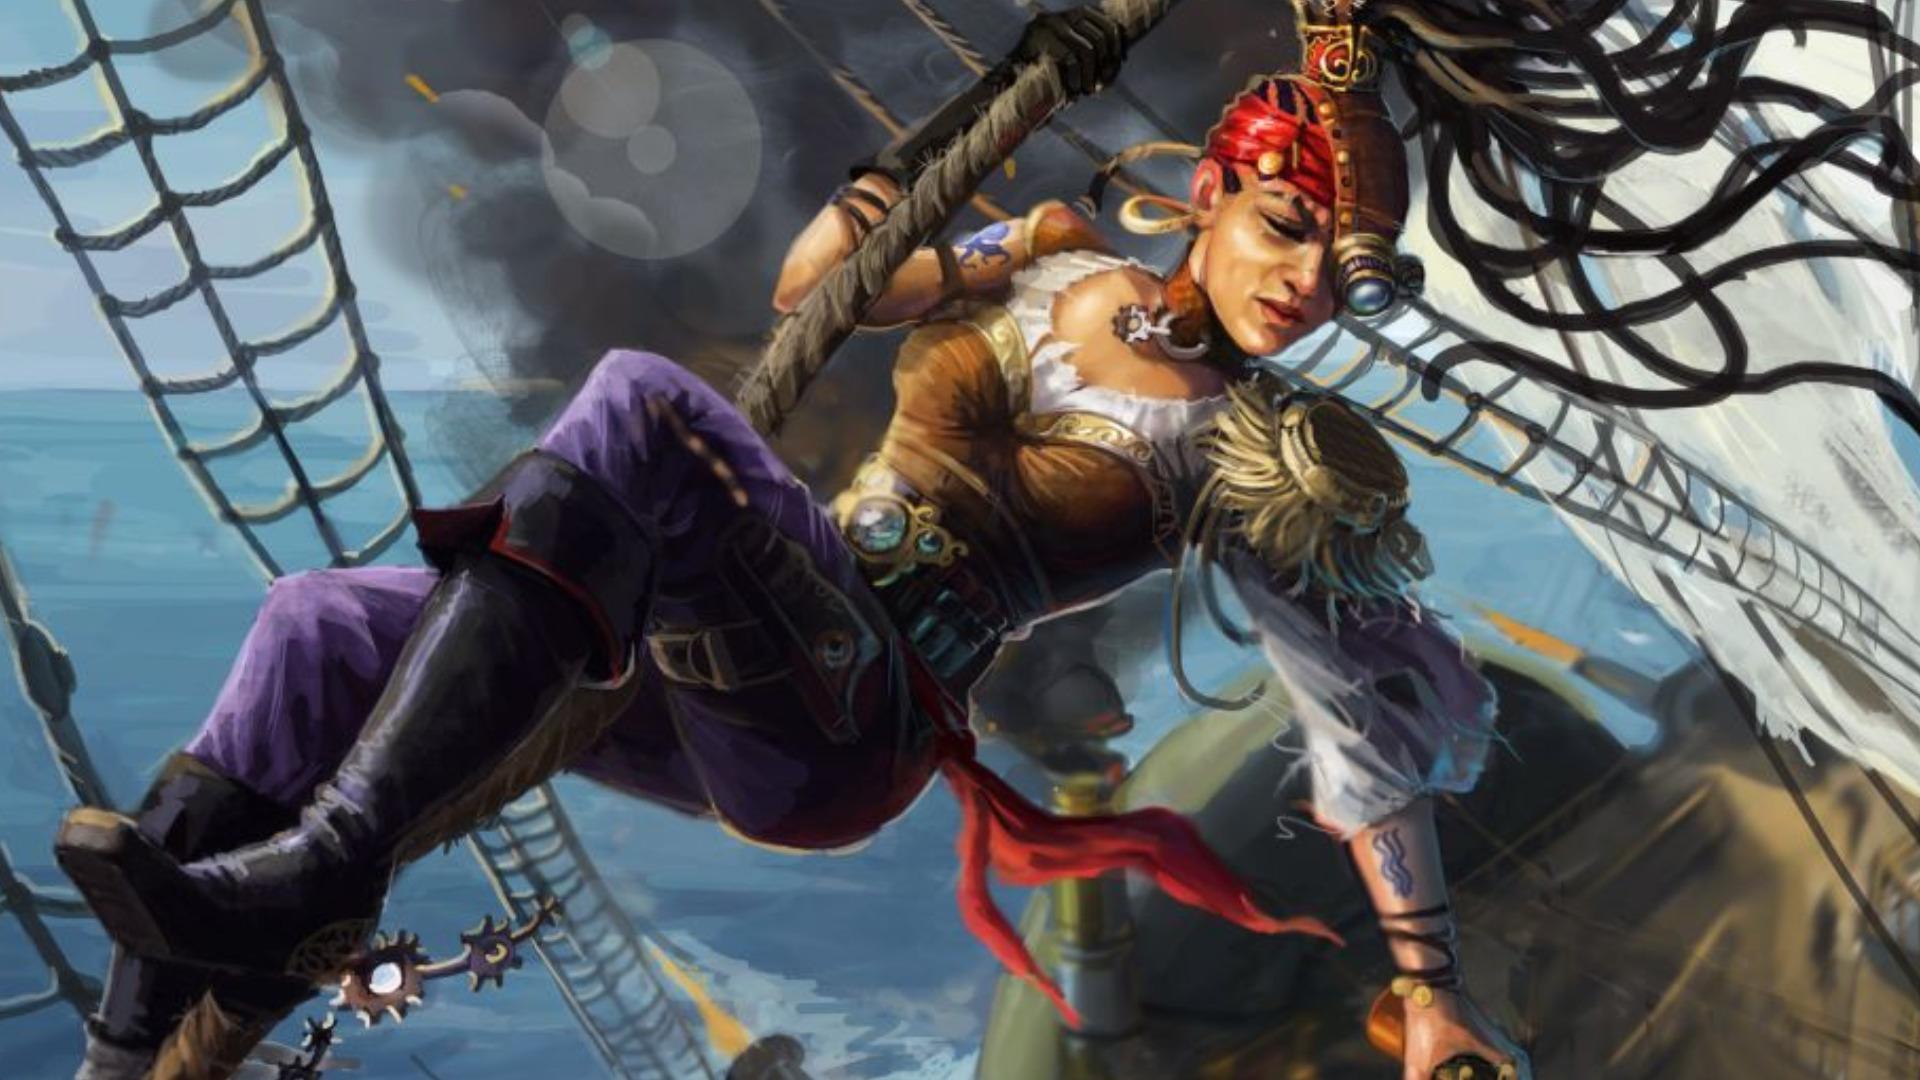 Pirate Wench Wallpaper. Pirate